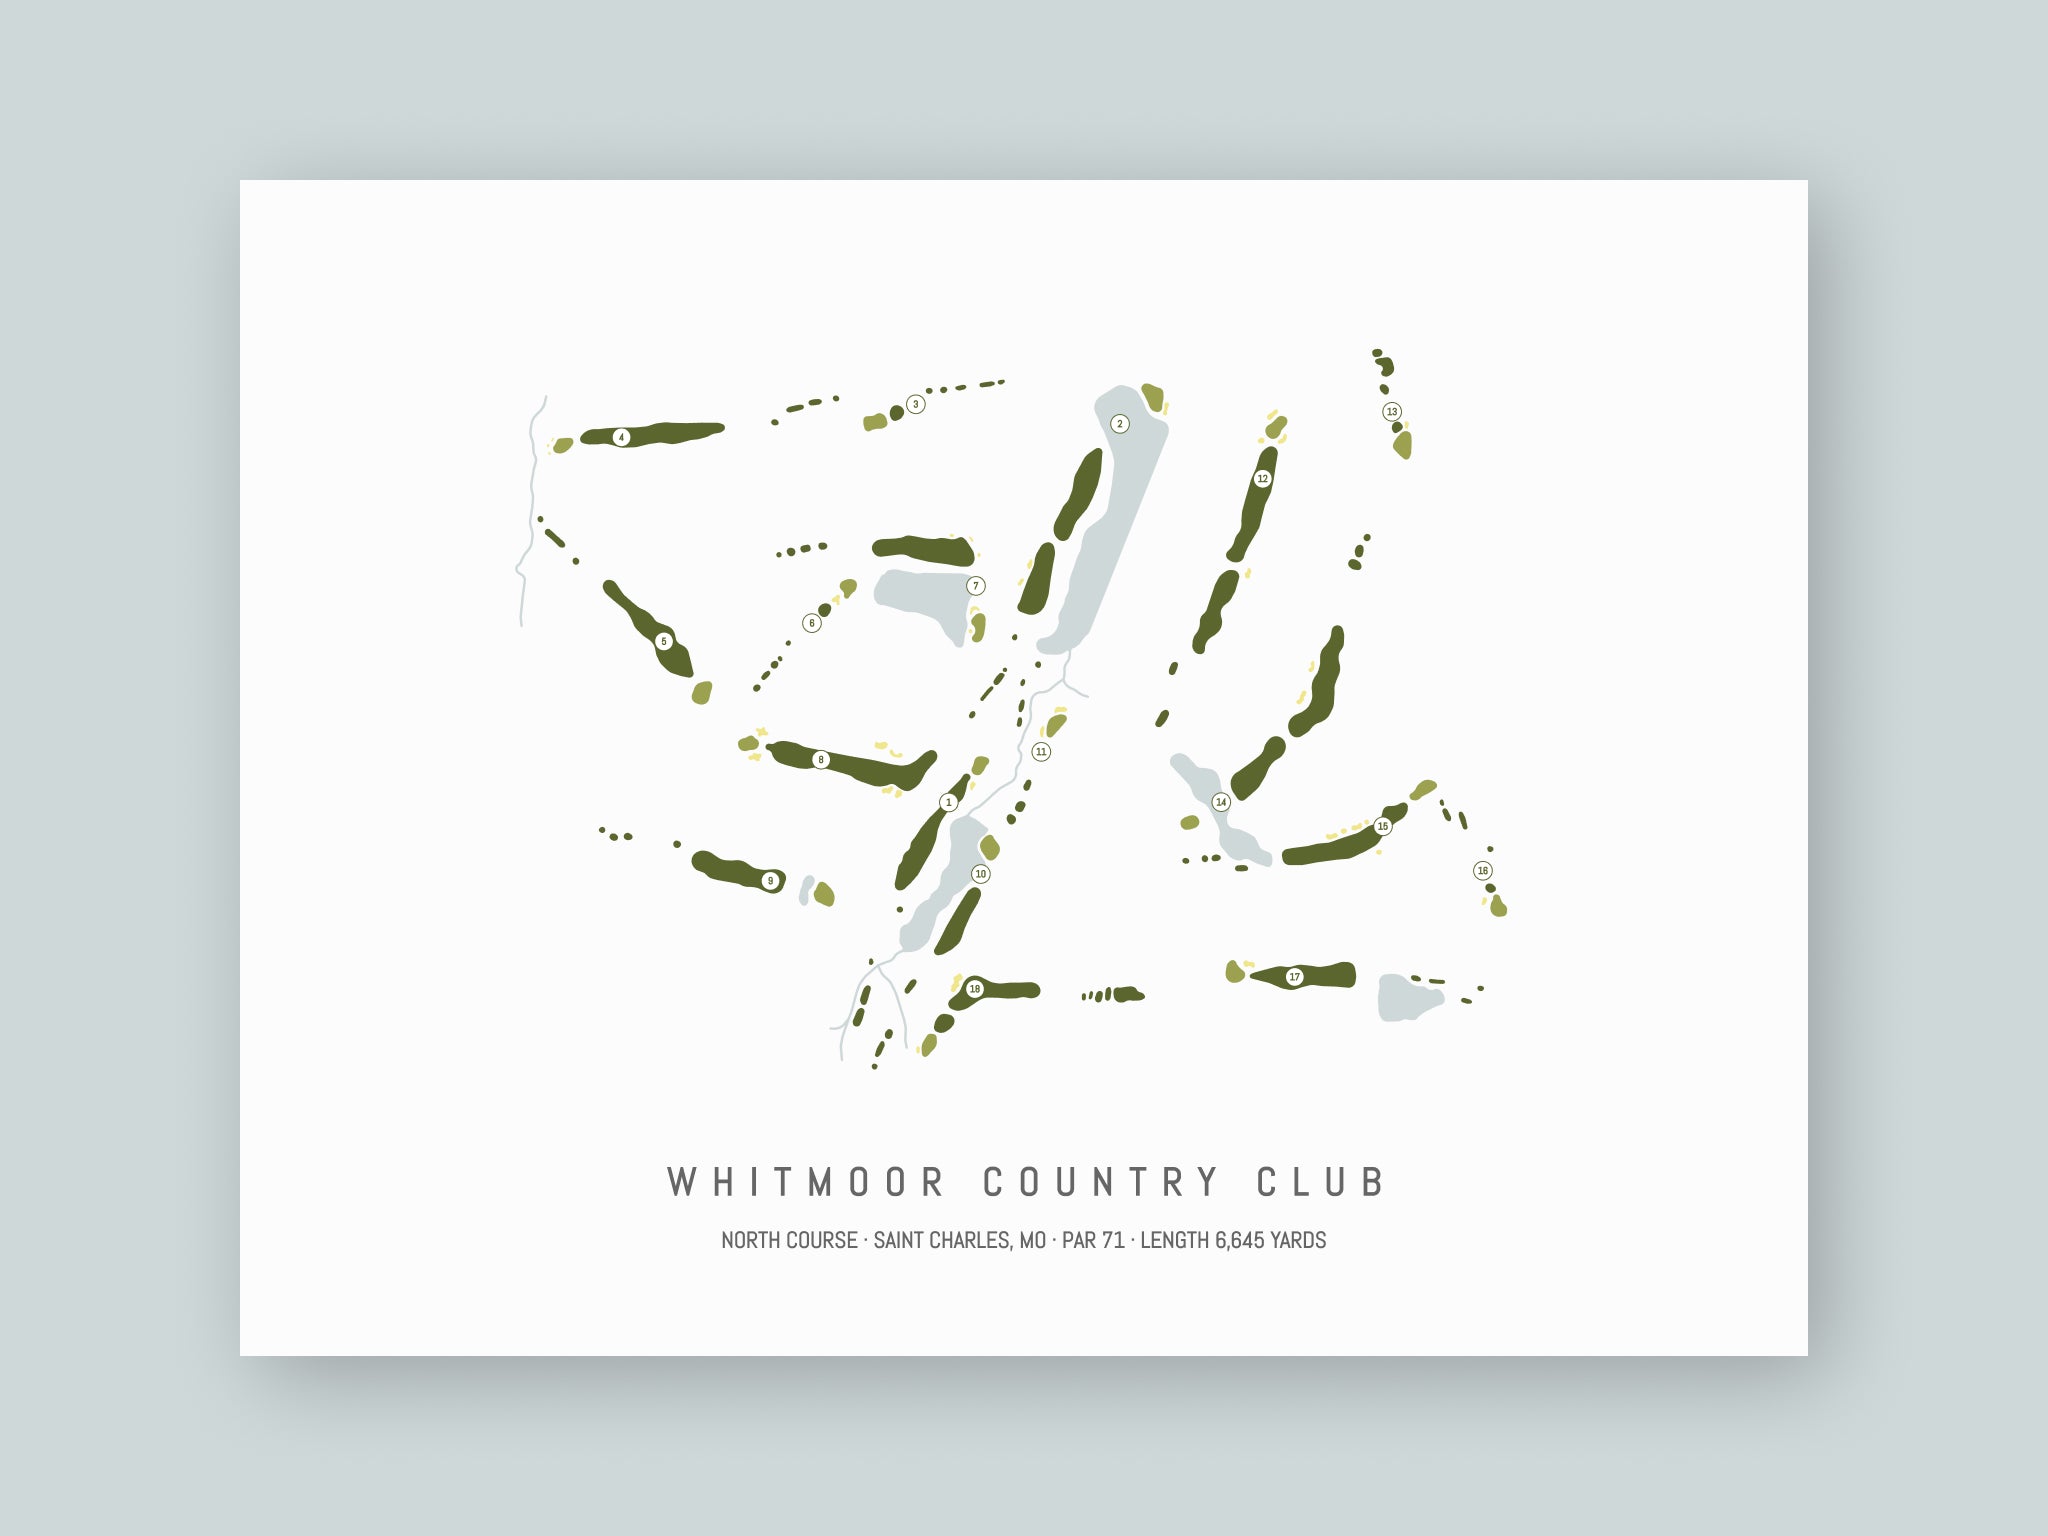 Whitmoor Country Club - North Course